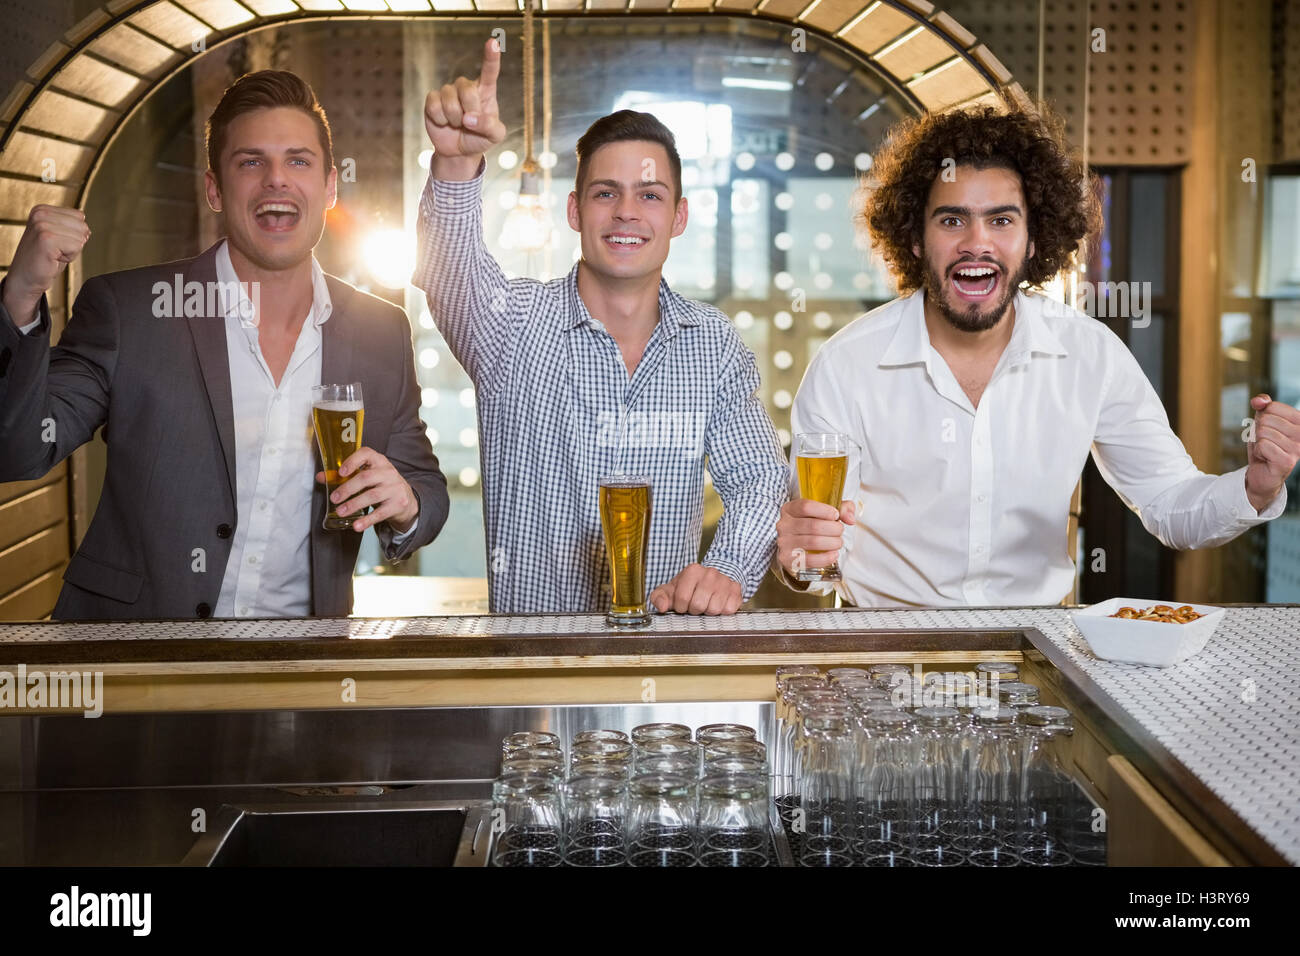 Friends raising their fist while having beer at bar counter Stock Photo